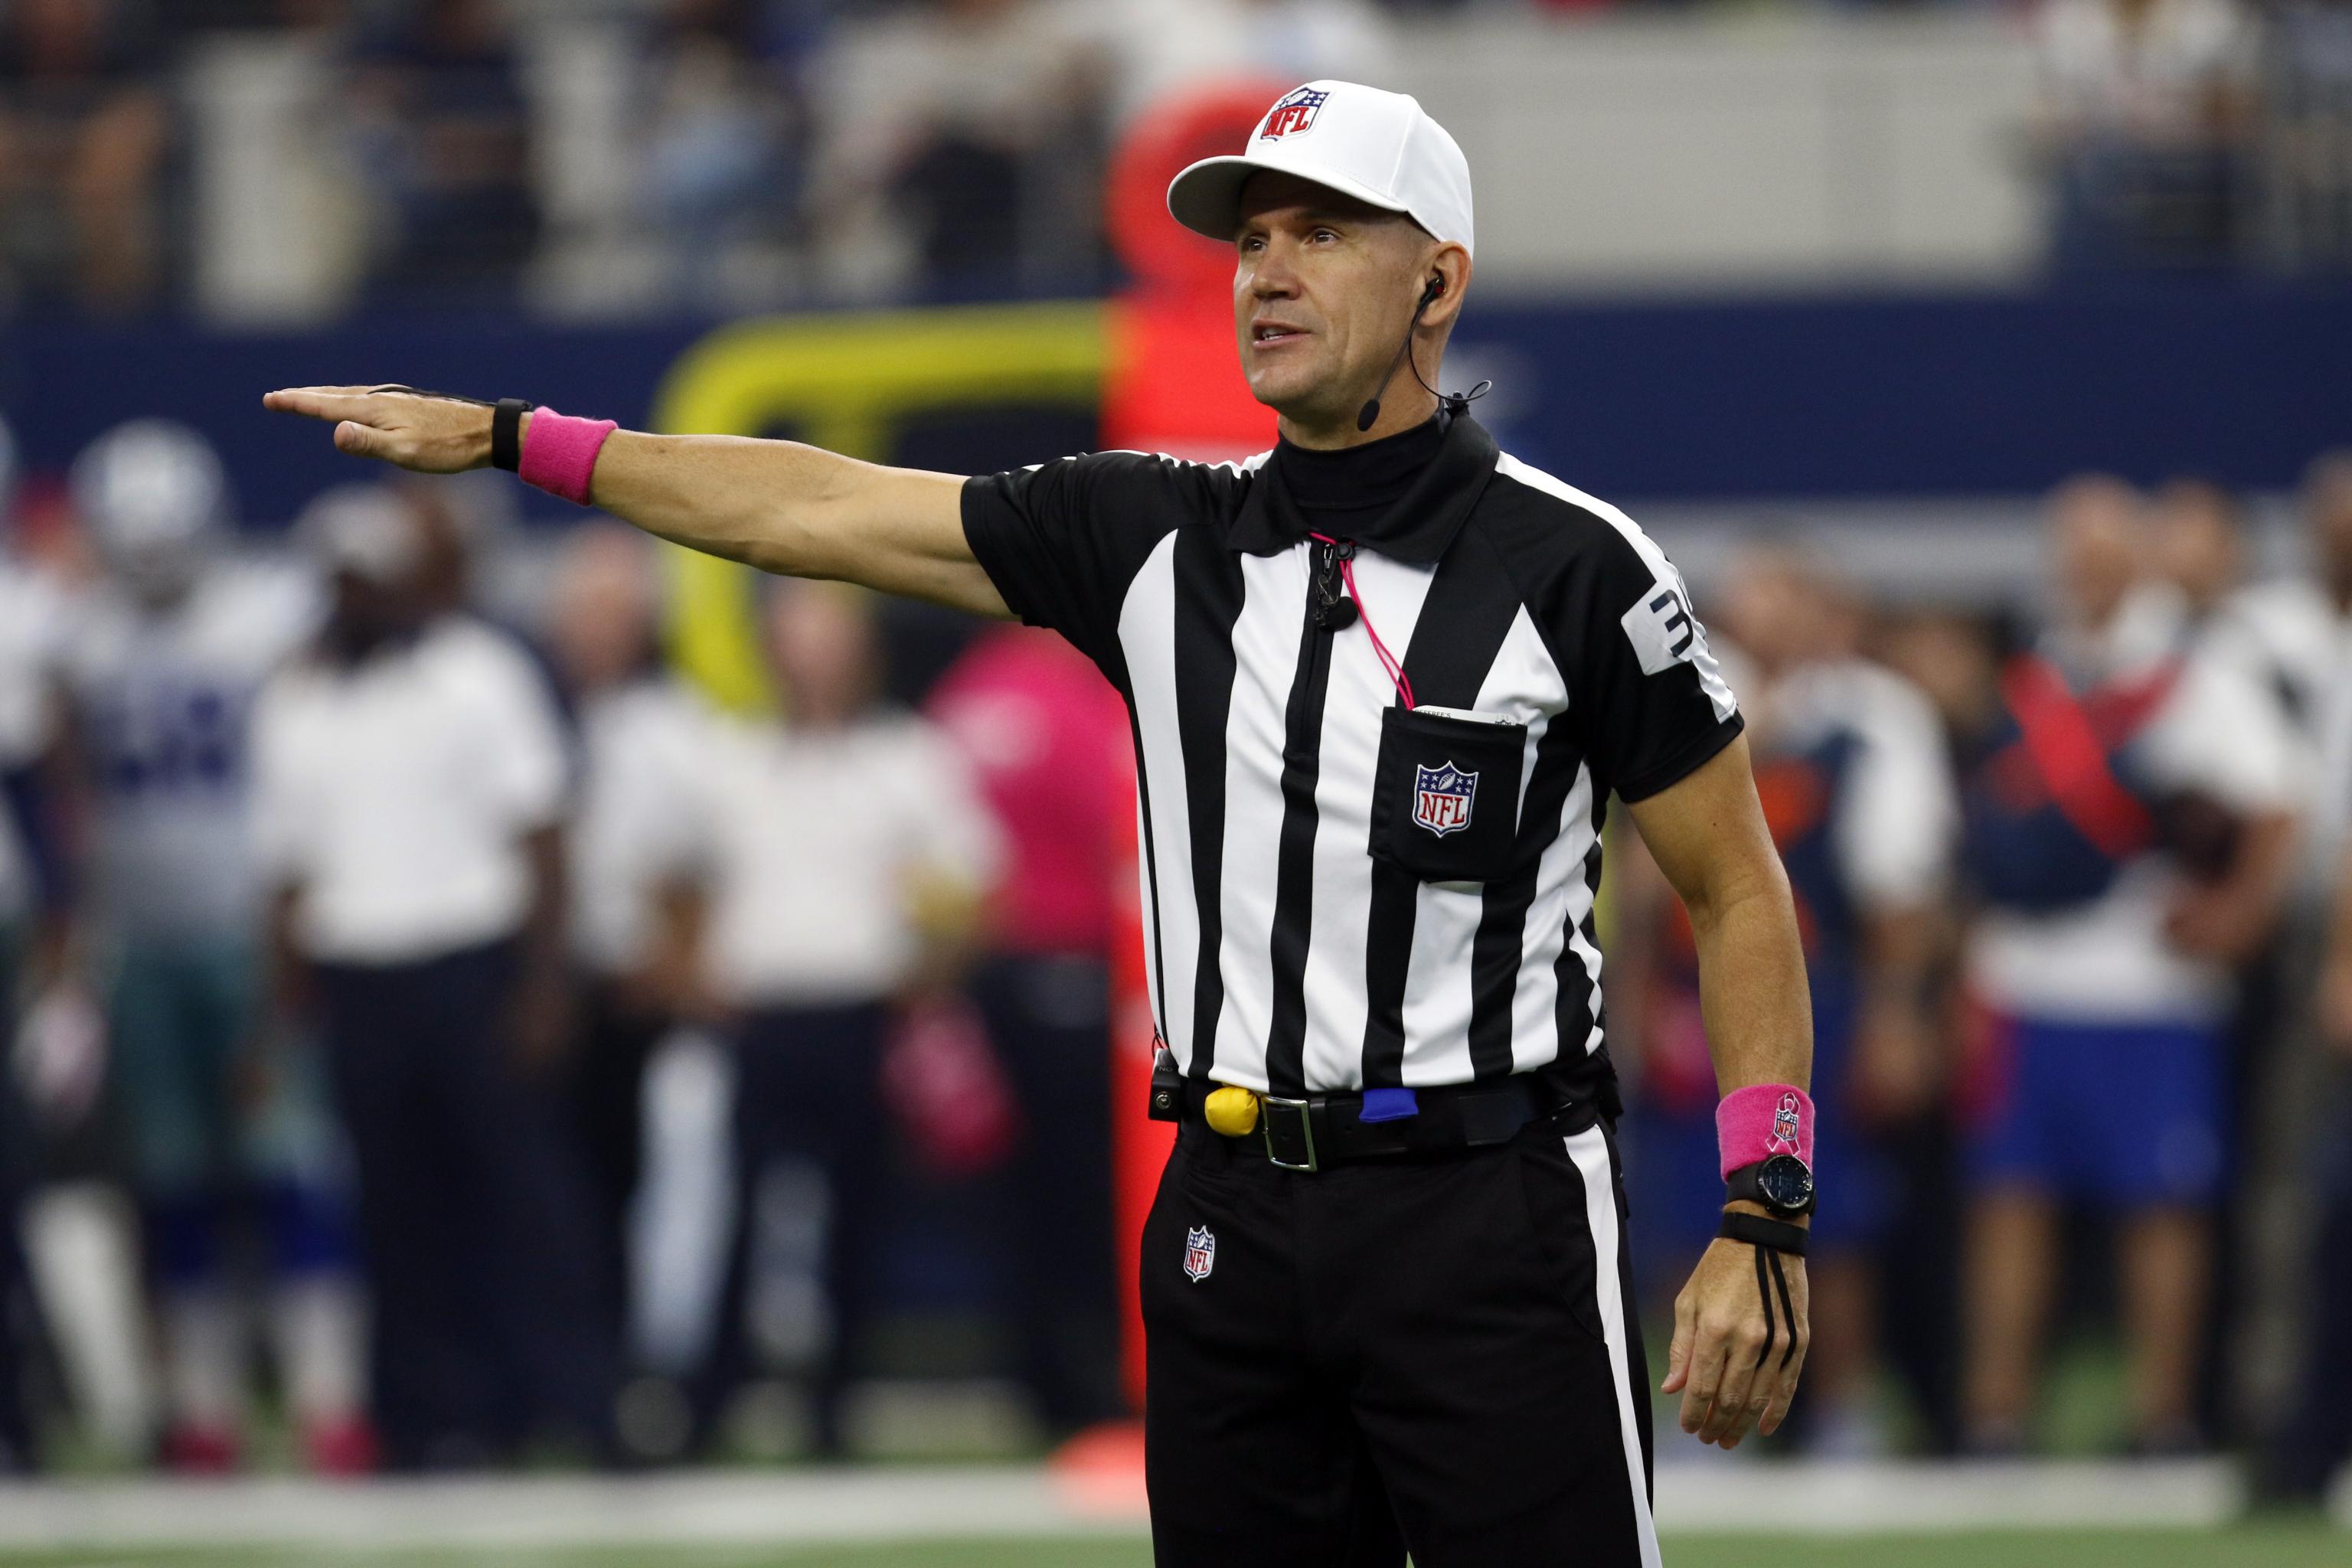 NFL Officiating on X: The Conference Championship game